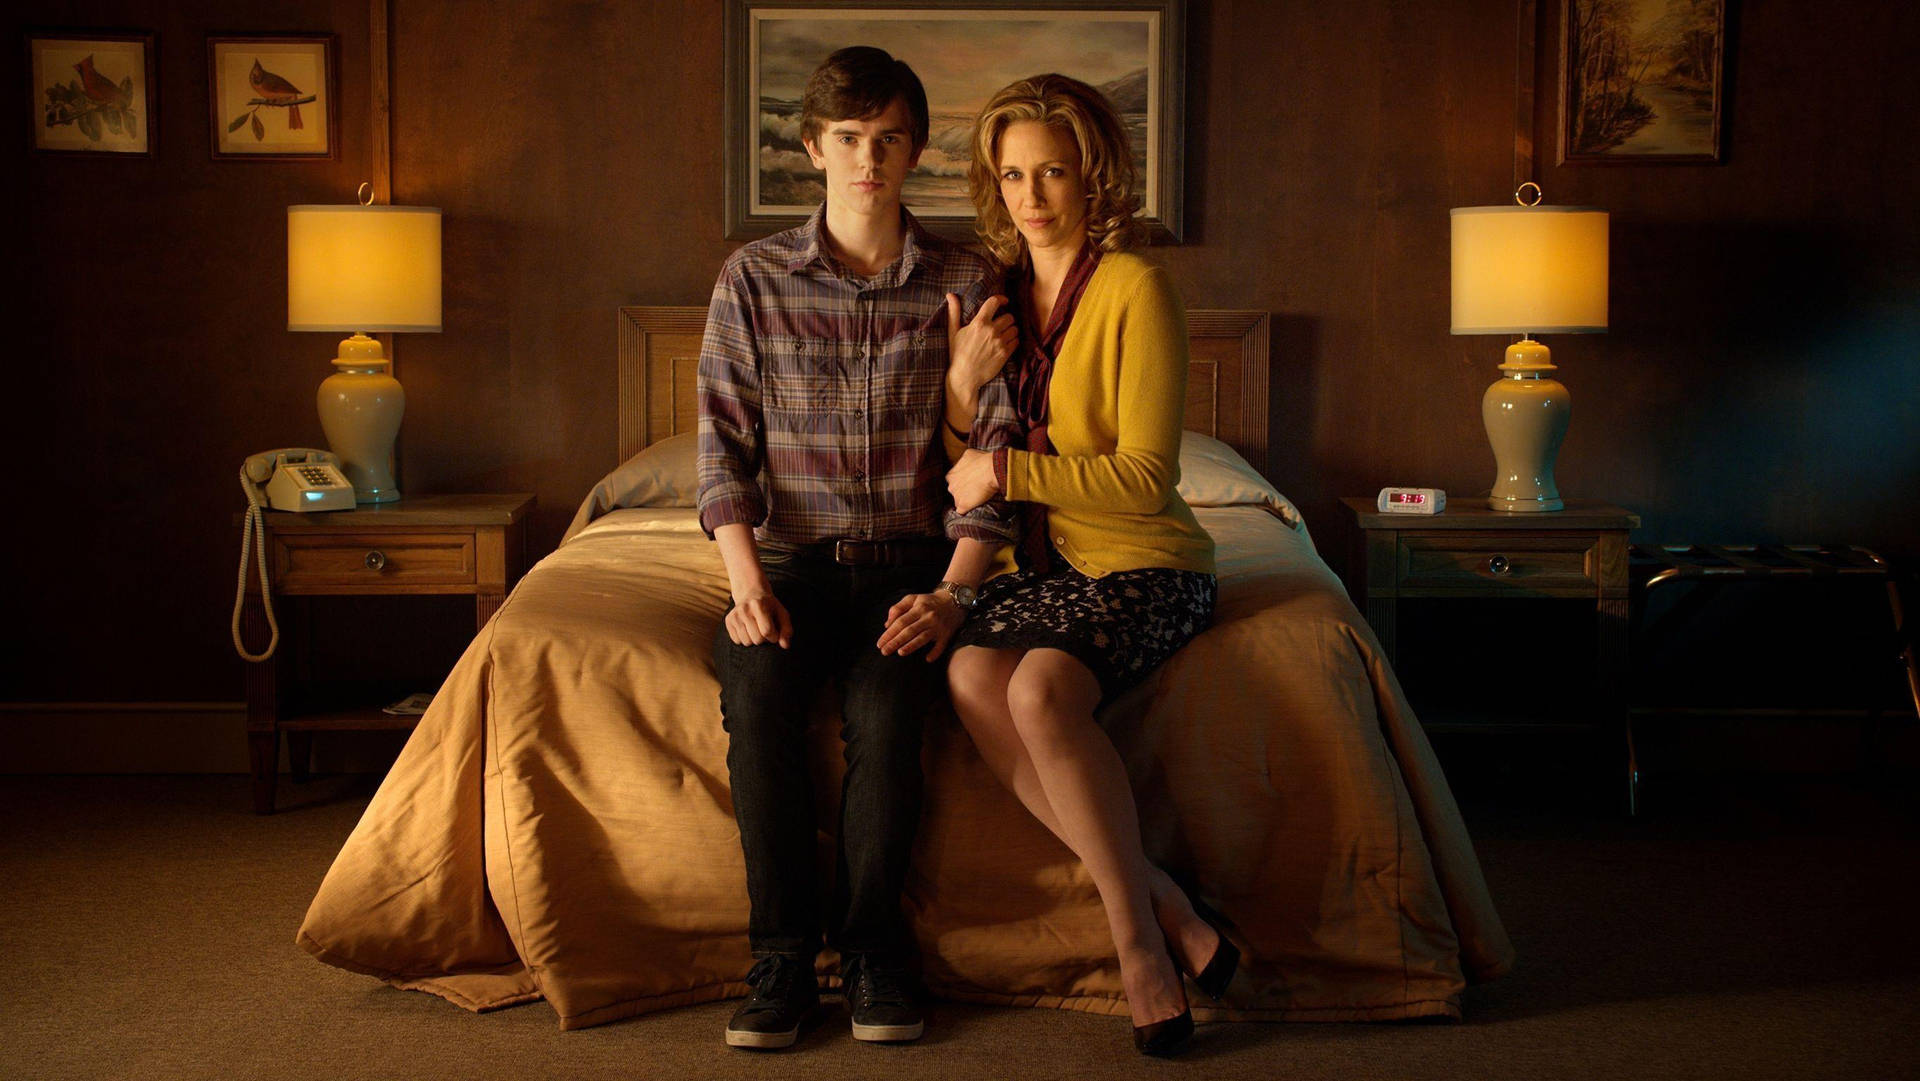 Tv Series Bates Motel Bedroom With Norma And Norman